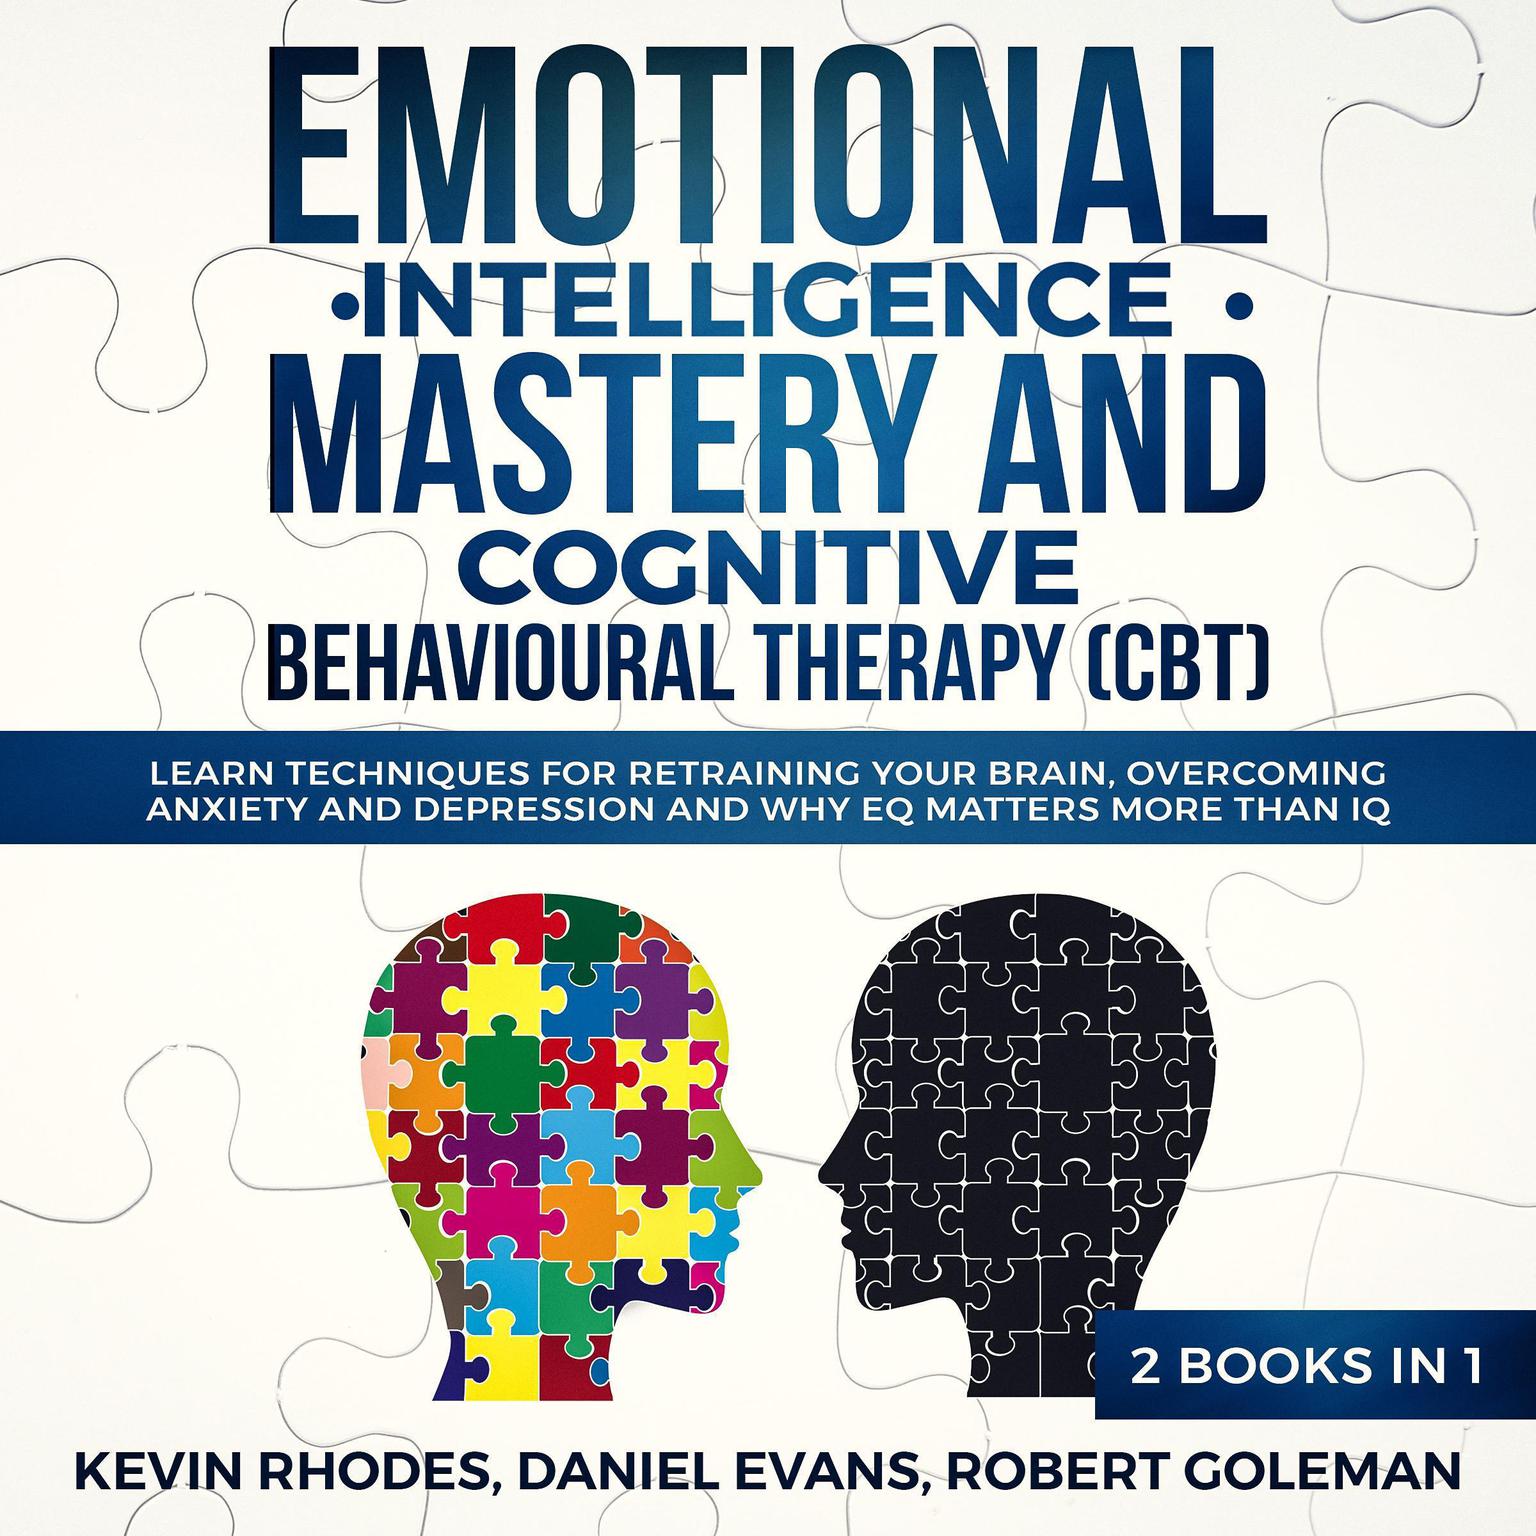 Emotional Intelligence Mastery and Cognitive Behavioral Therapy (CBT) (2 Books in 1): Learn Techniques for Retraining Your Brain, Overcoming Anxiety and Depression and Why EQ Matters More than IQ Audiobook, by Daniel Evans